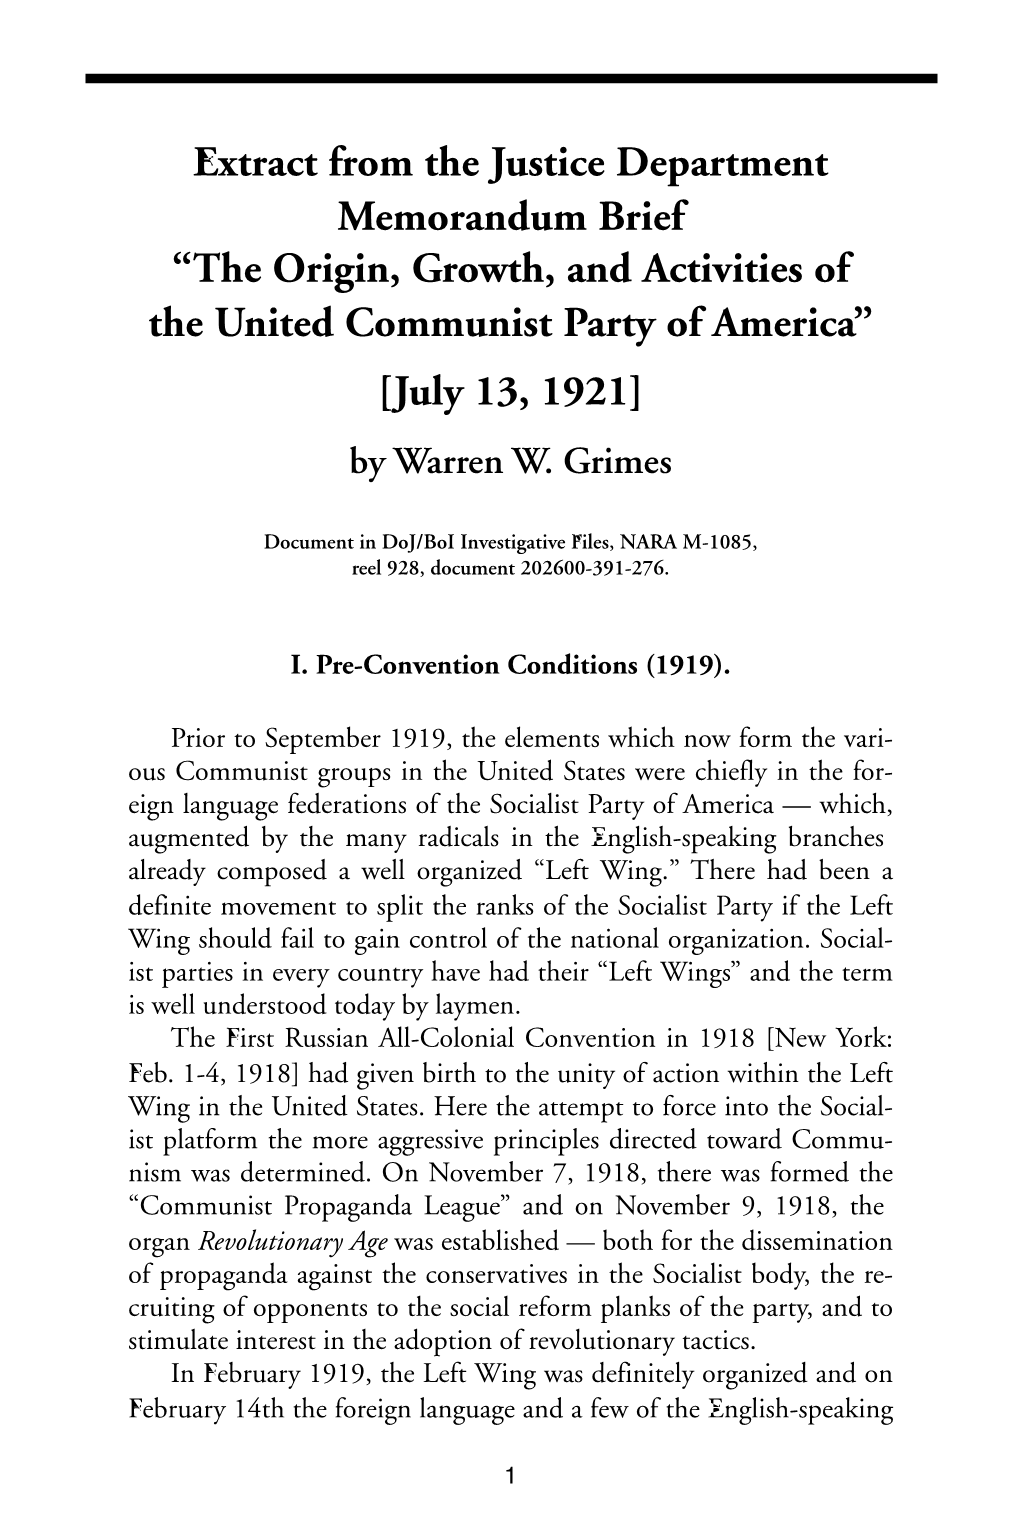 Extract from the Justice Department Memorandum Brief “The Origin, Growth, and Activities of the United Communist Party of America” [July 13, 1921] by Warren W